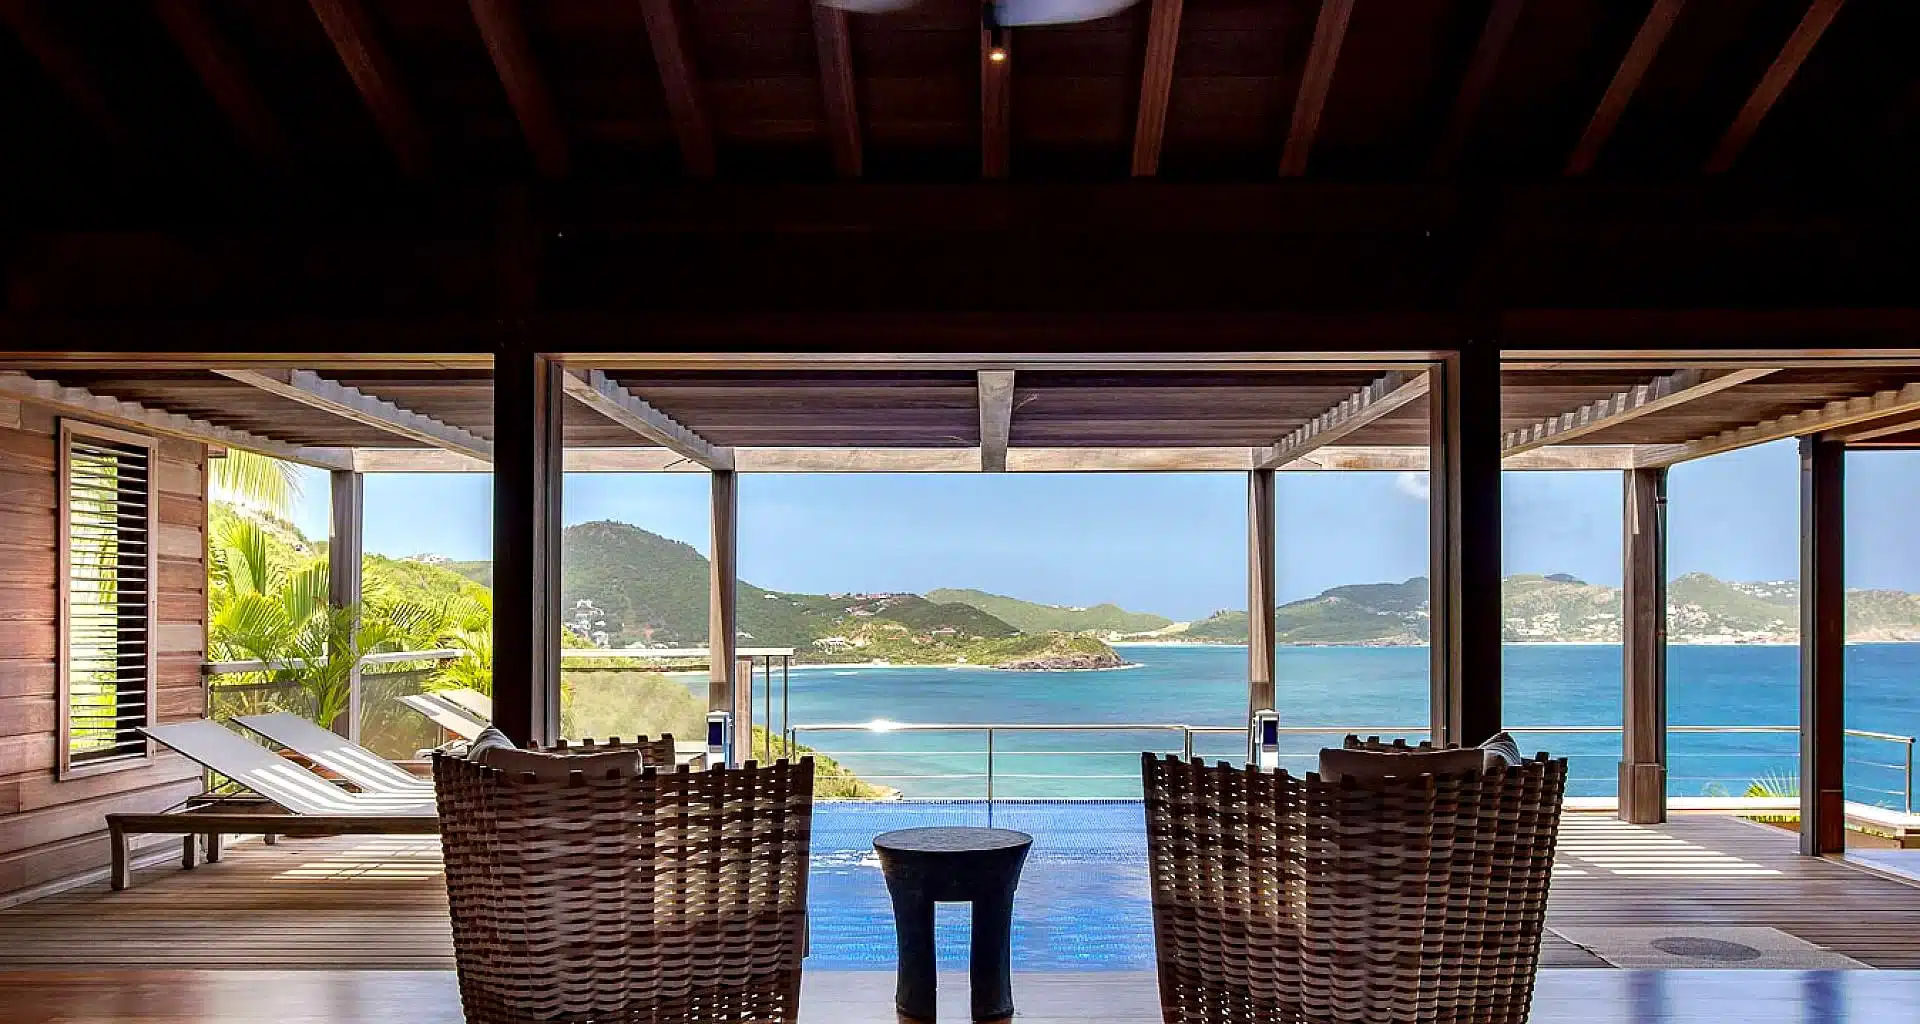 7 nights in St. Barths, fundraiser auction items, live auction items